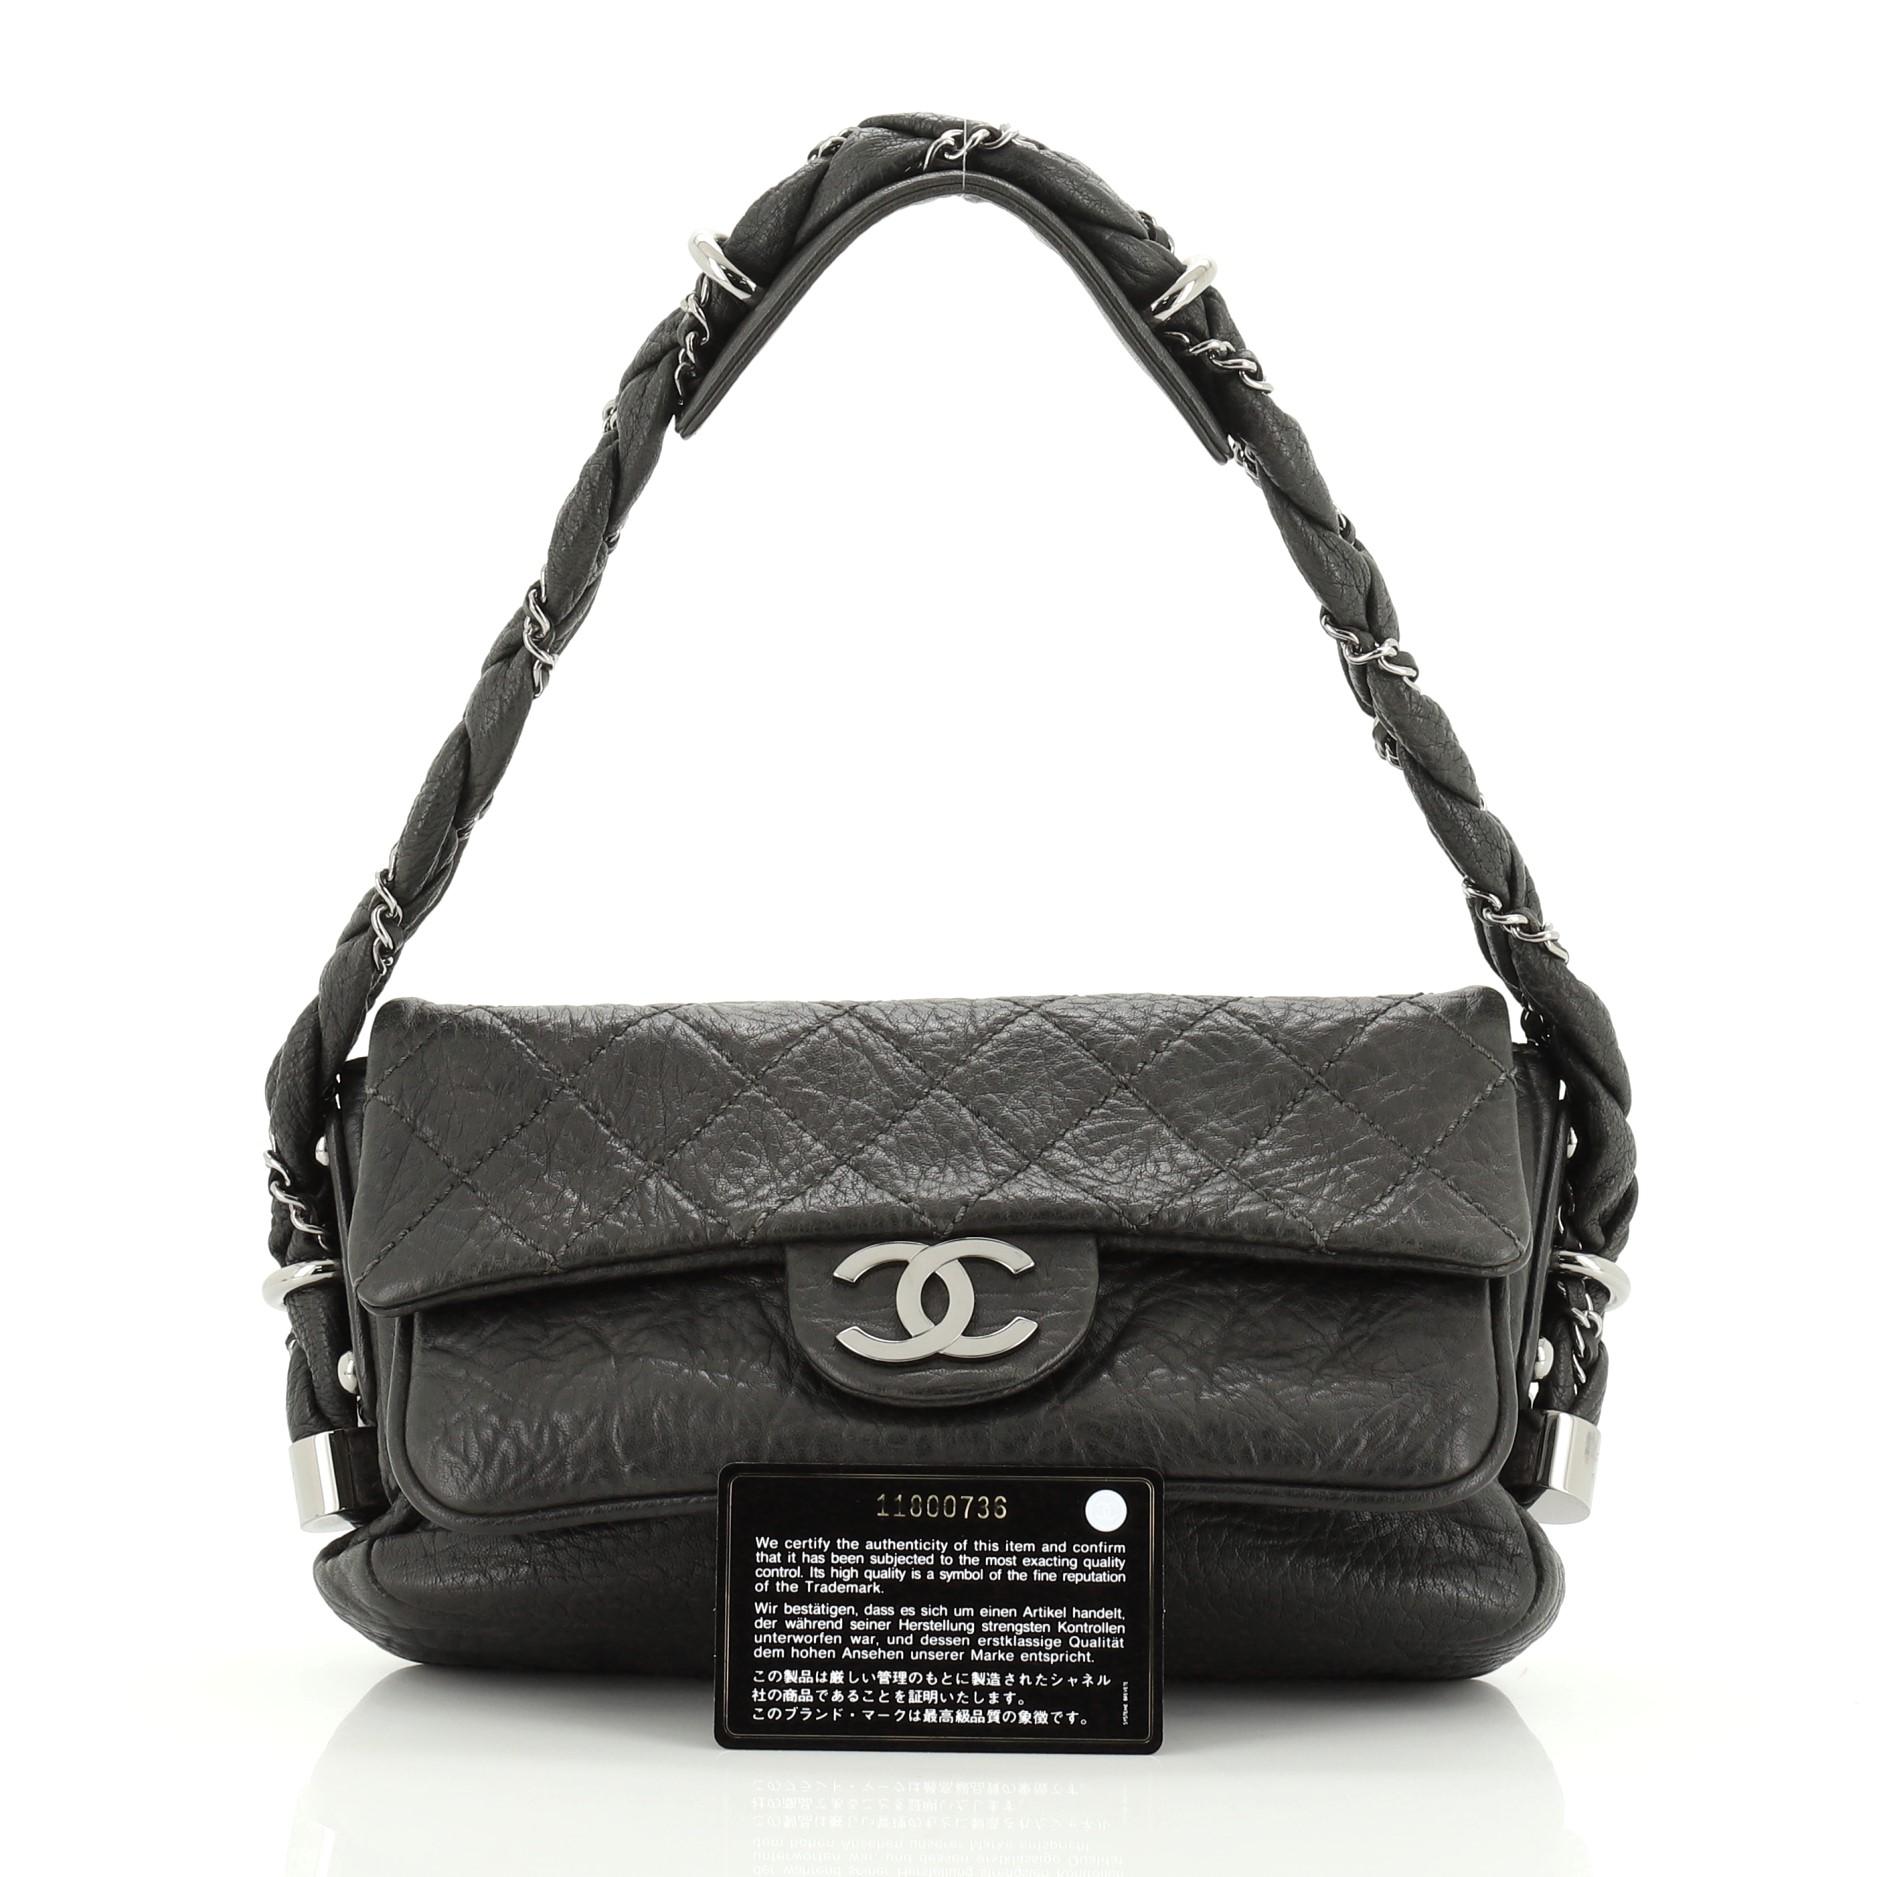 This Chanel Lady Braid Flap Bag Quilted Distressed Lambskin Small, crafted in black quilted distressed lambskin leather, features a braided leather and chain handle, CC logo and gunmetal-tone hardware. Its magnetic snap closure opens to a gray satin